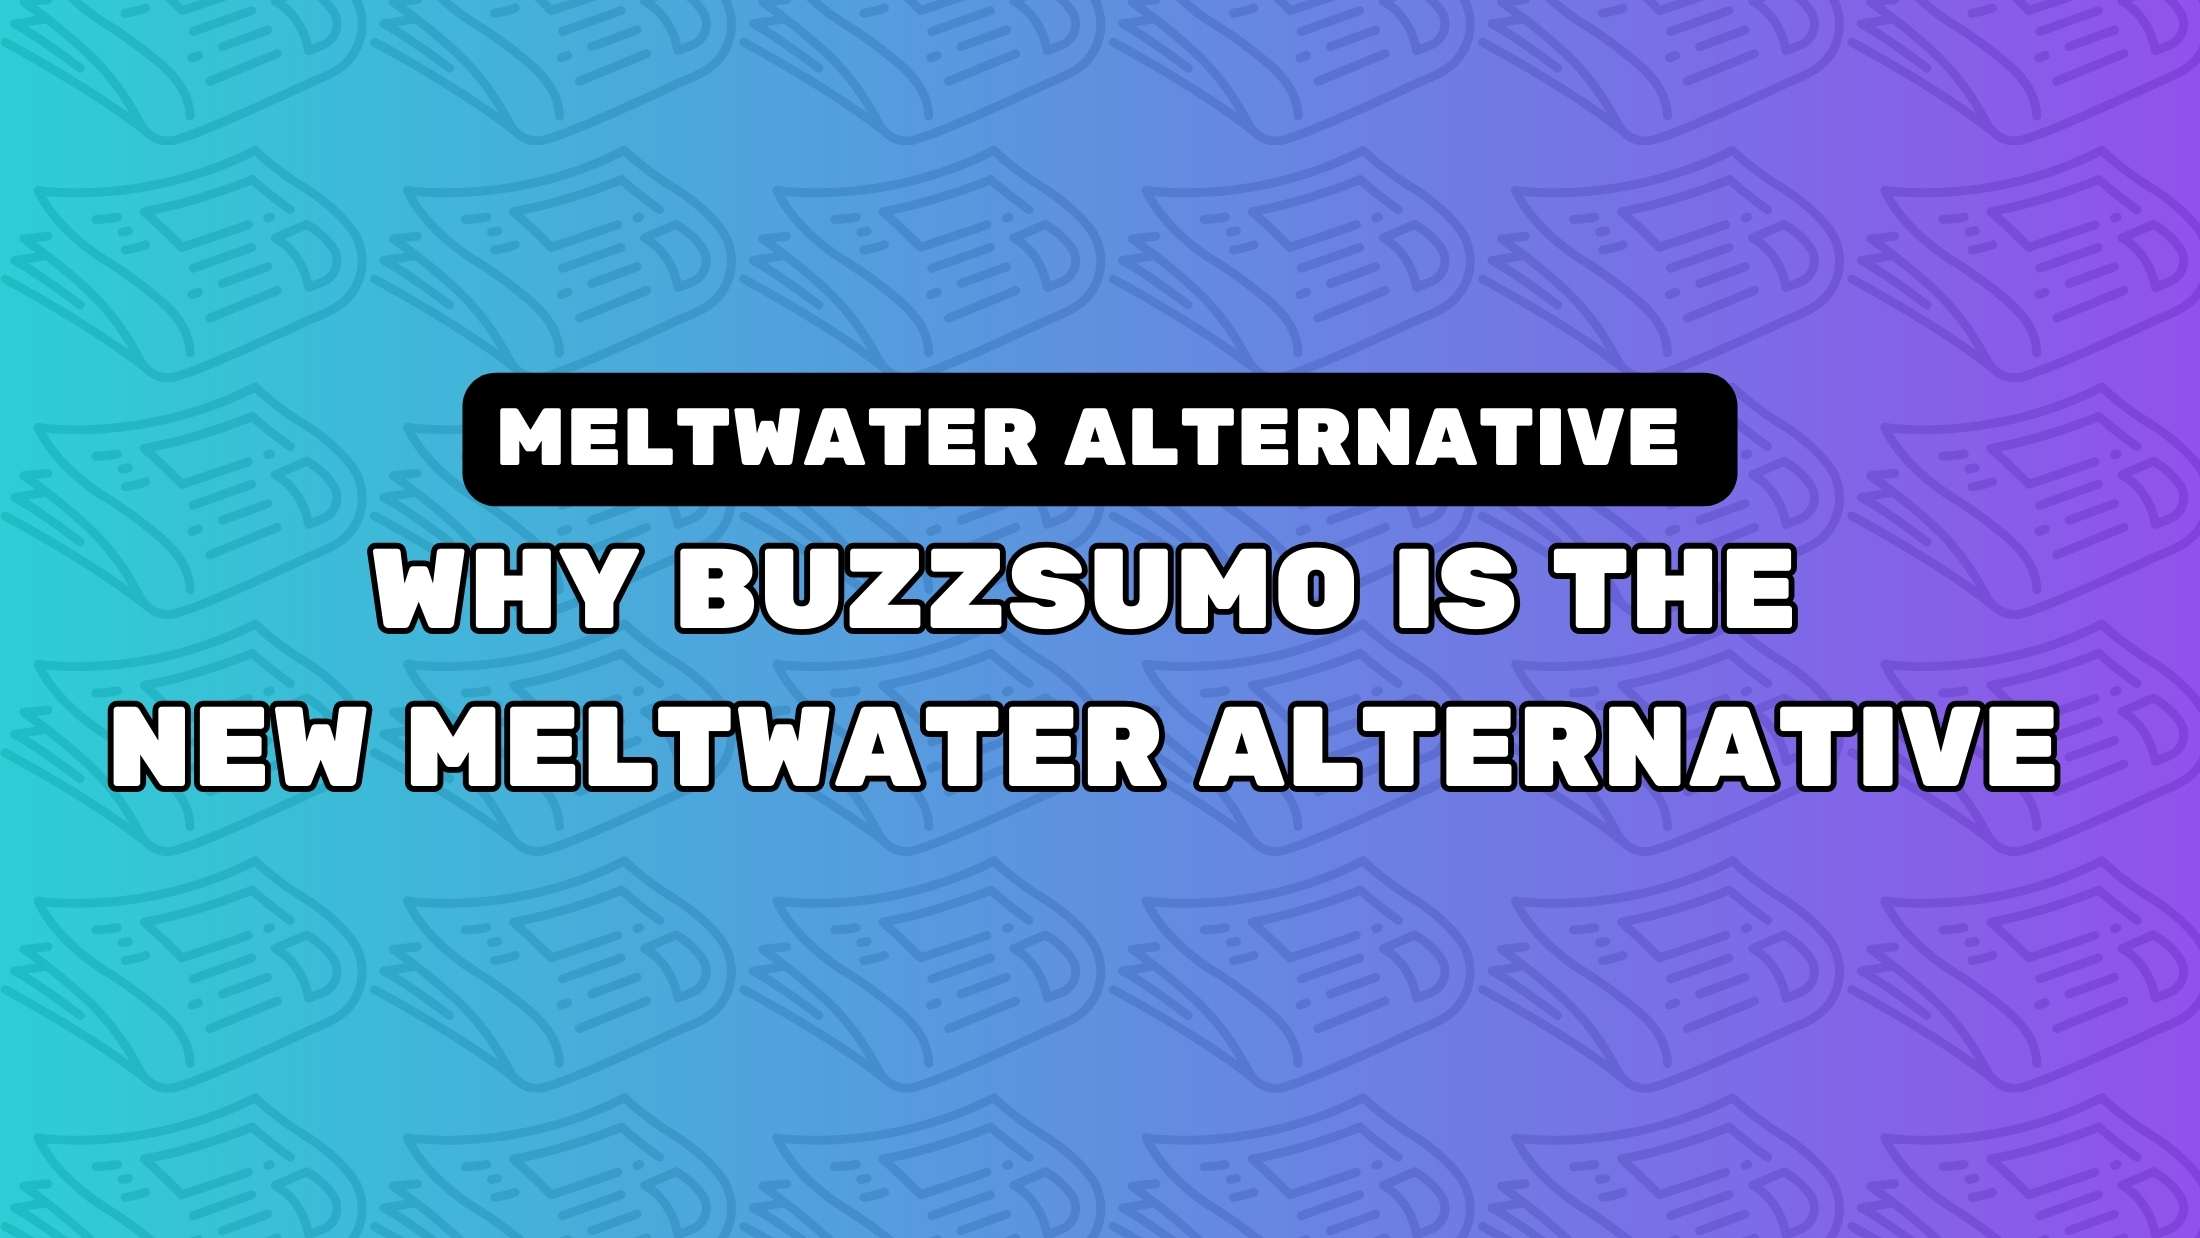 Why BuzzSumo Is The New Meltwater Alternative For PR And Outreach